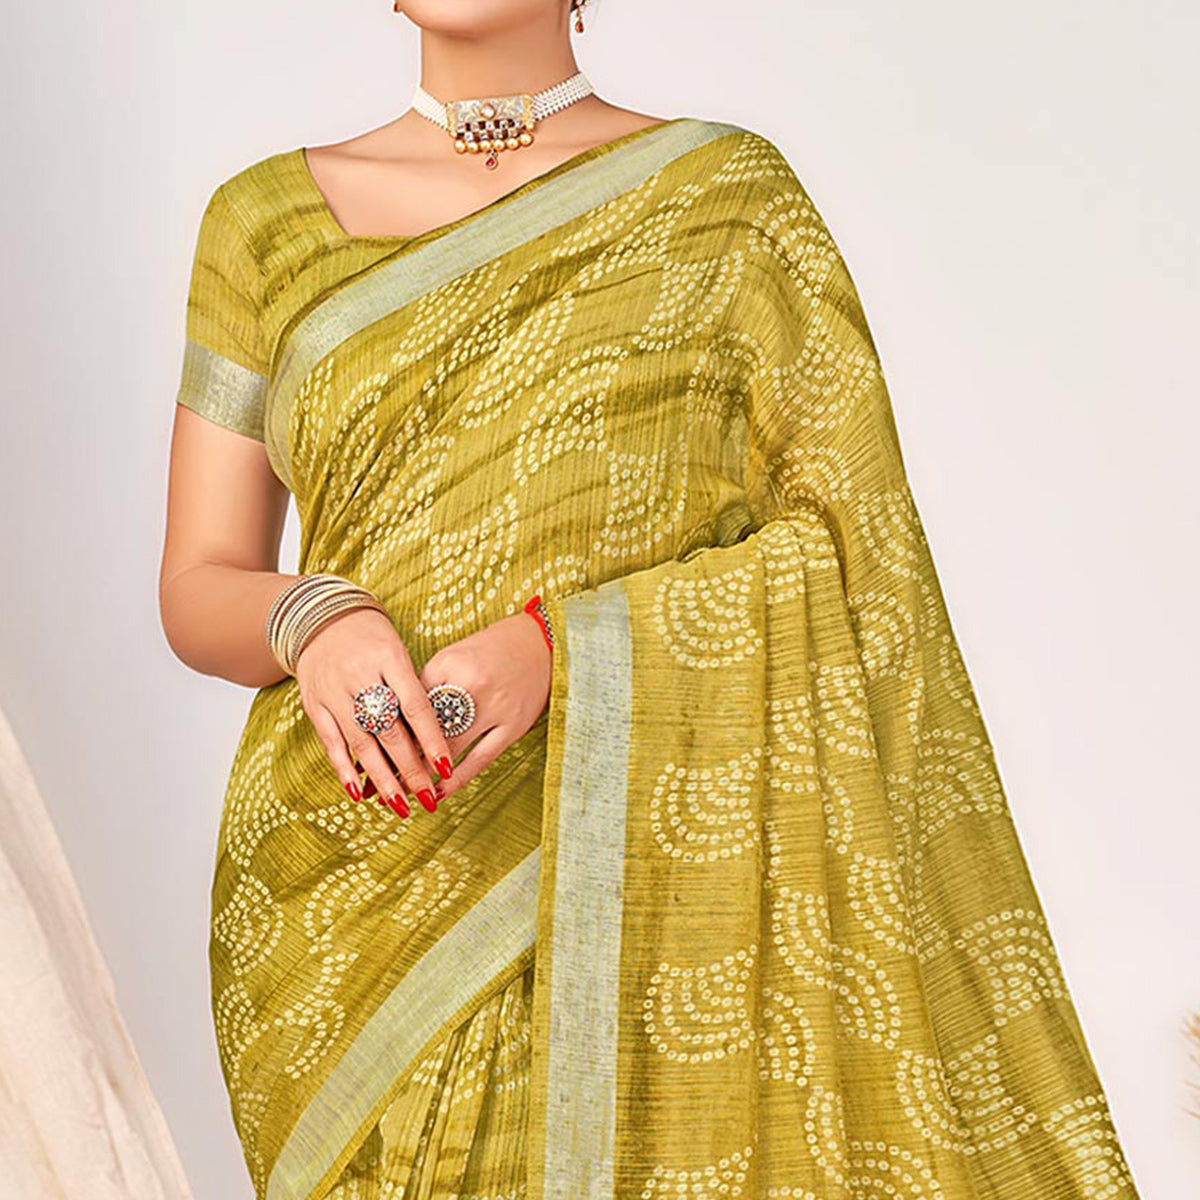 Olive Green Printed Cotton Silk Saree With Woven Border